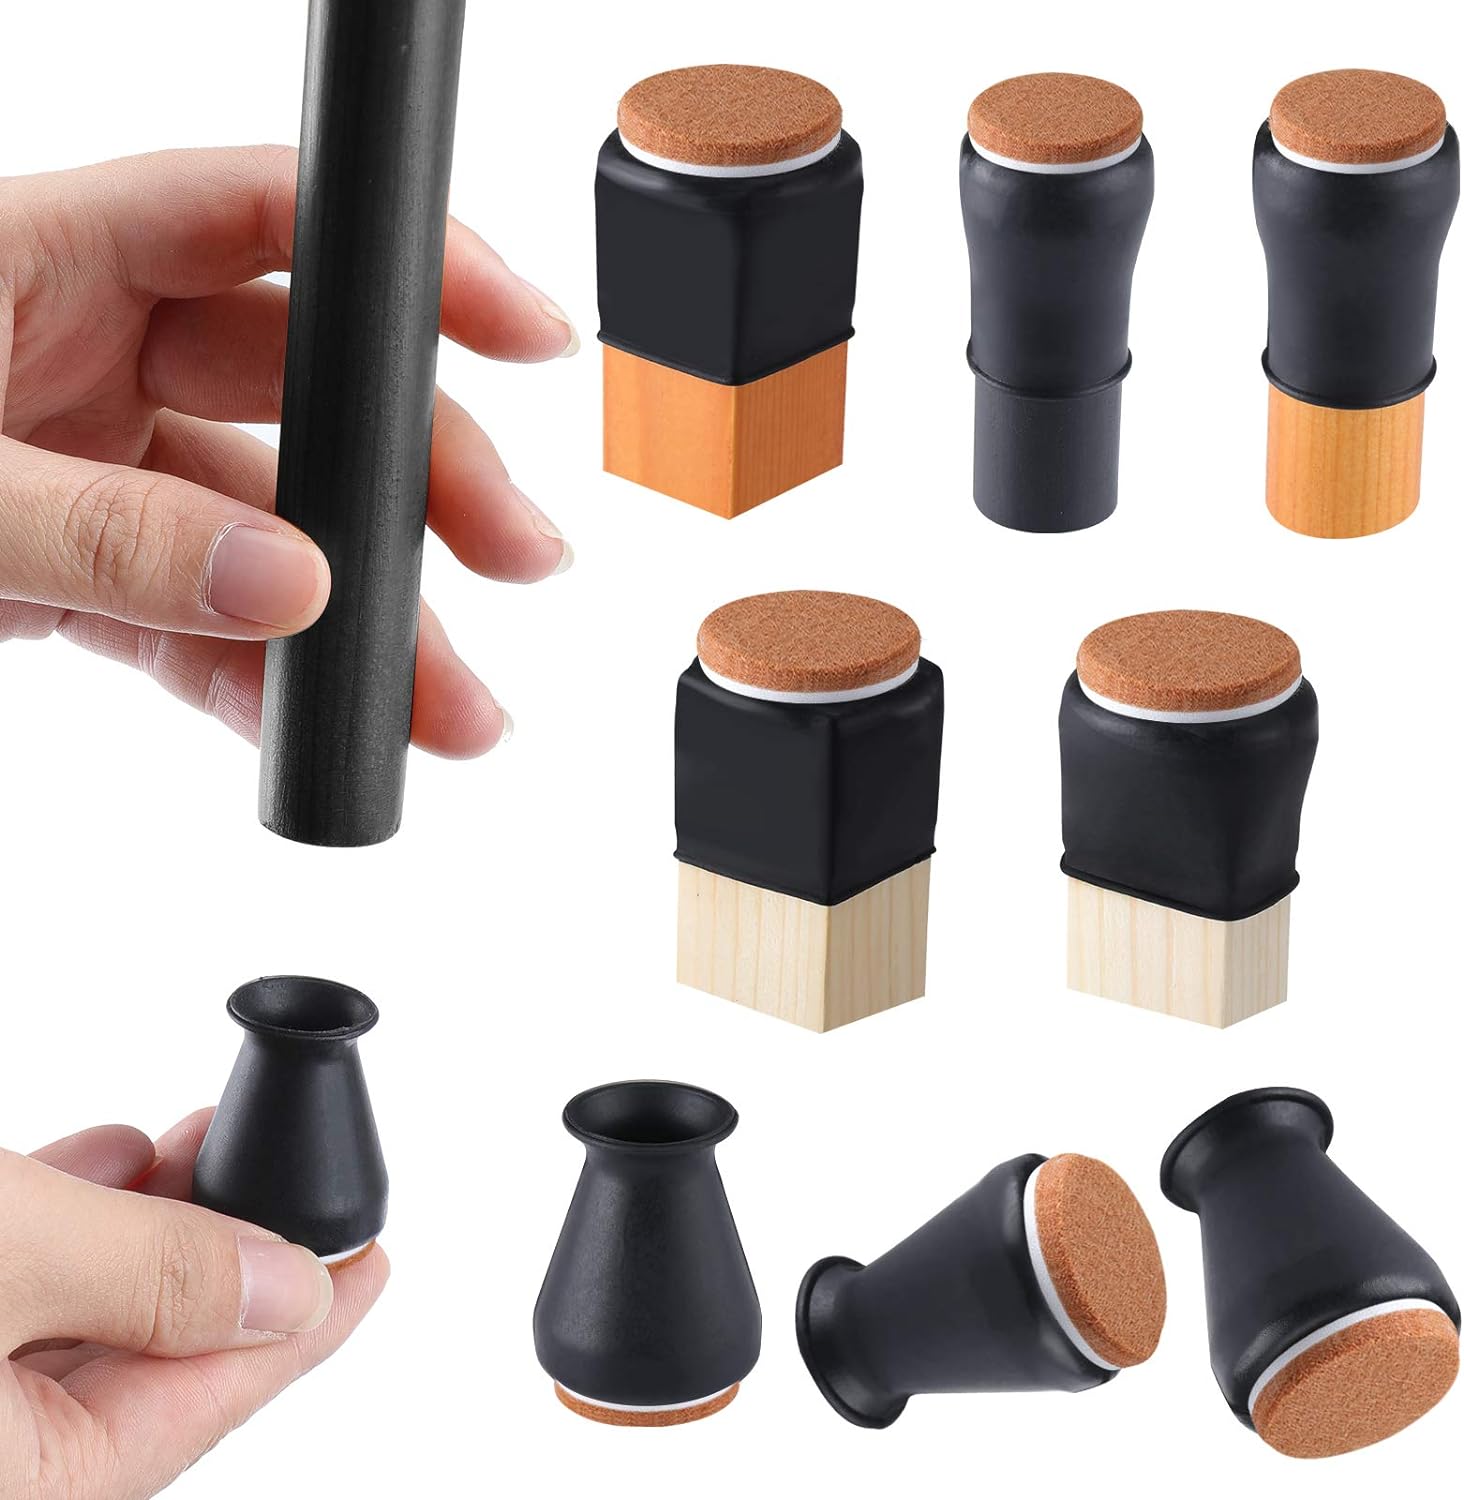 8/16pcs Square/Round Leg Silicone Caps Pad Table Feet Cover Wood Floor Protector 